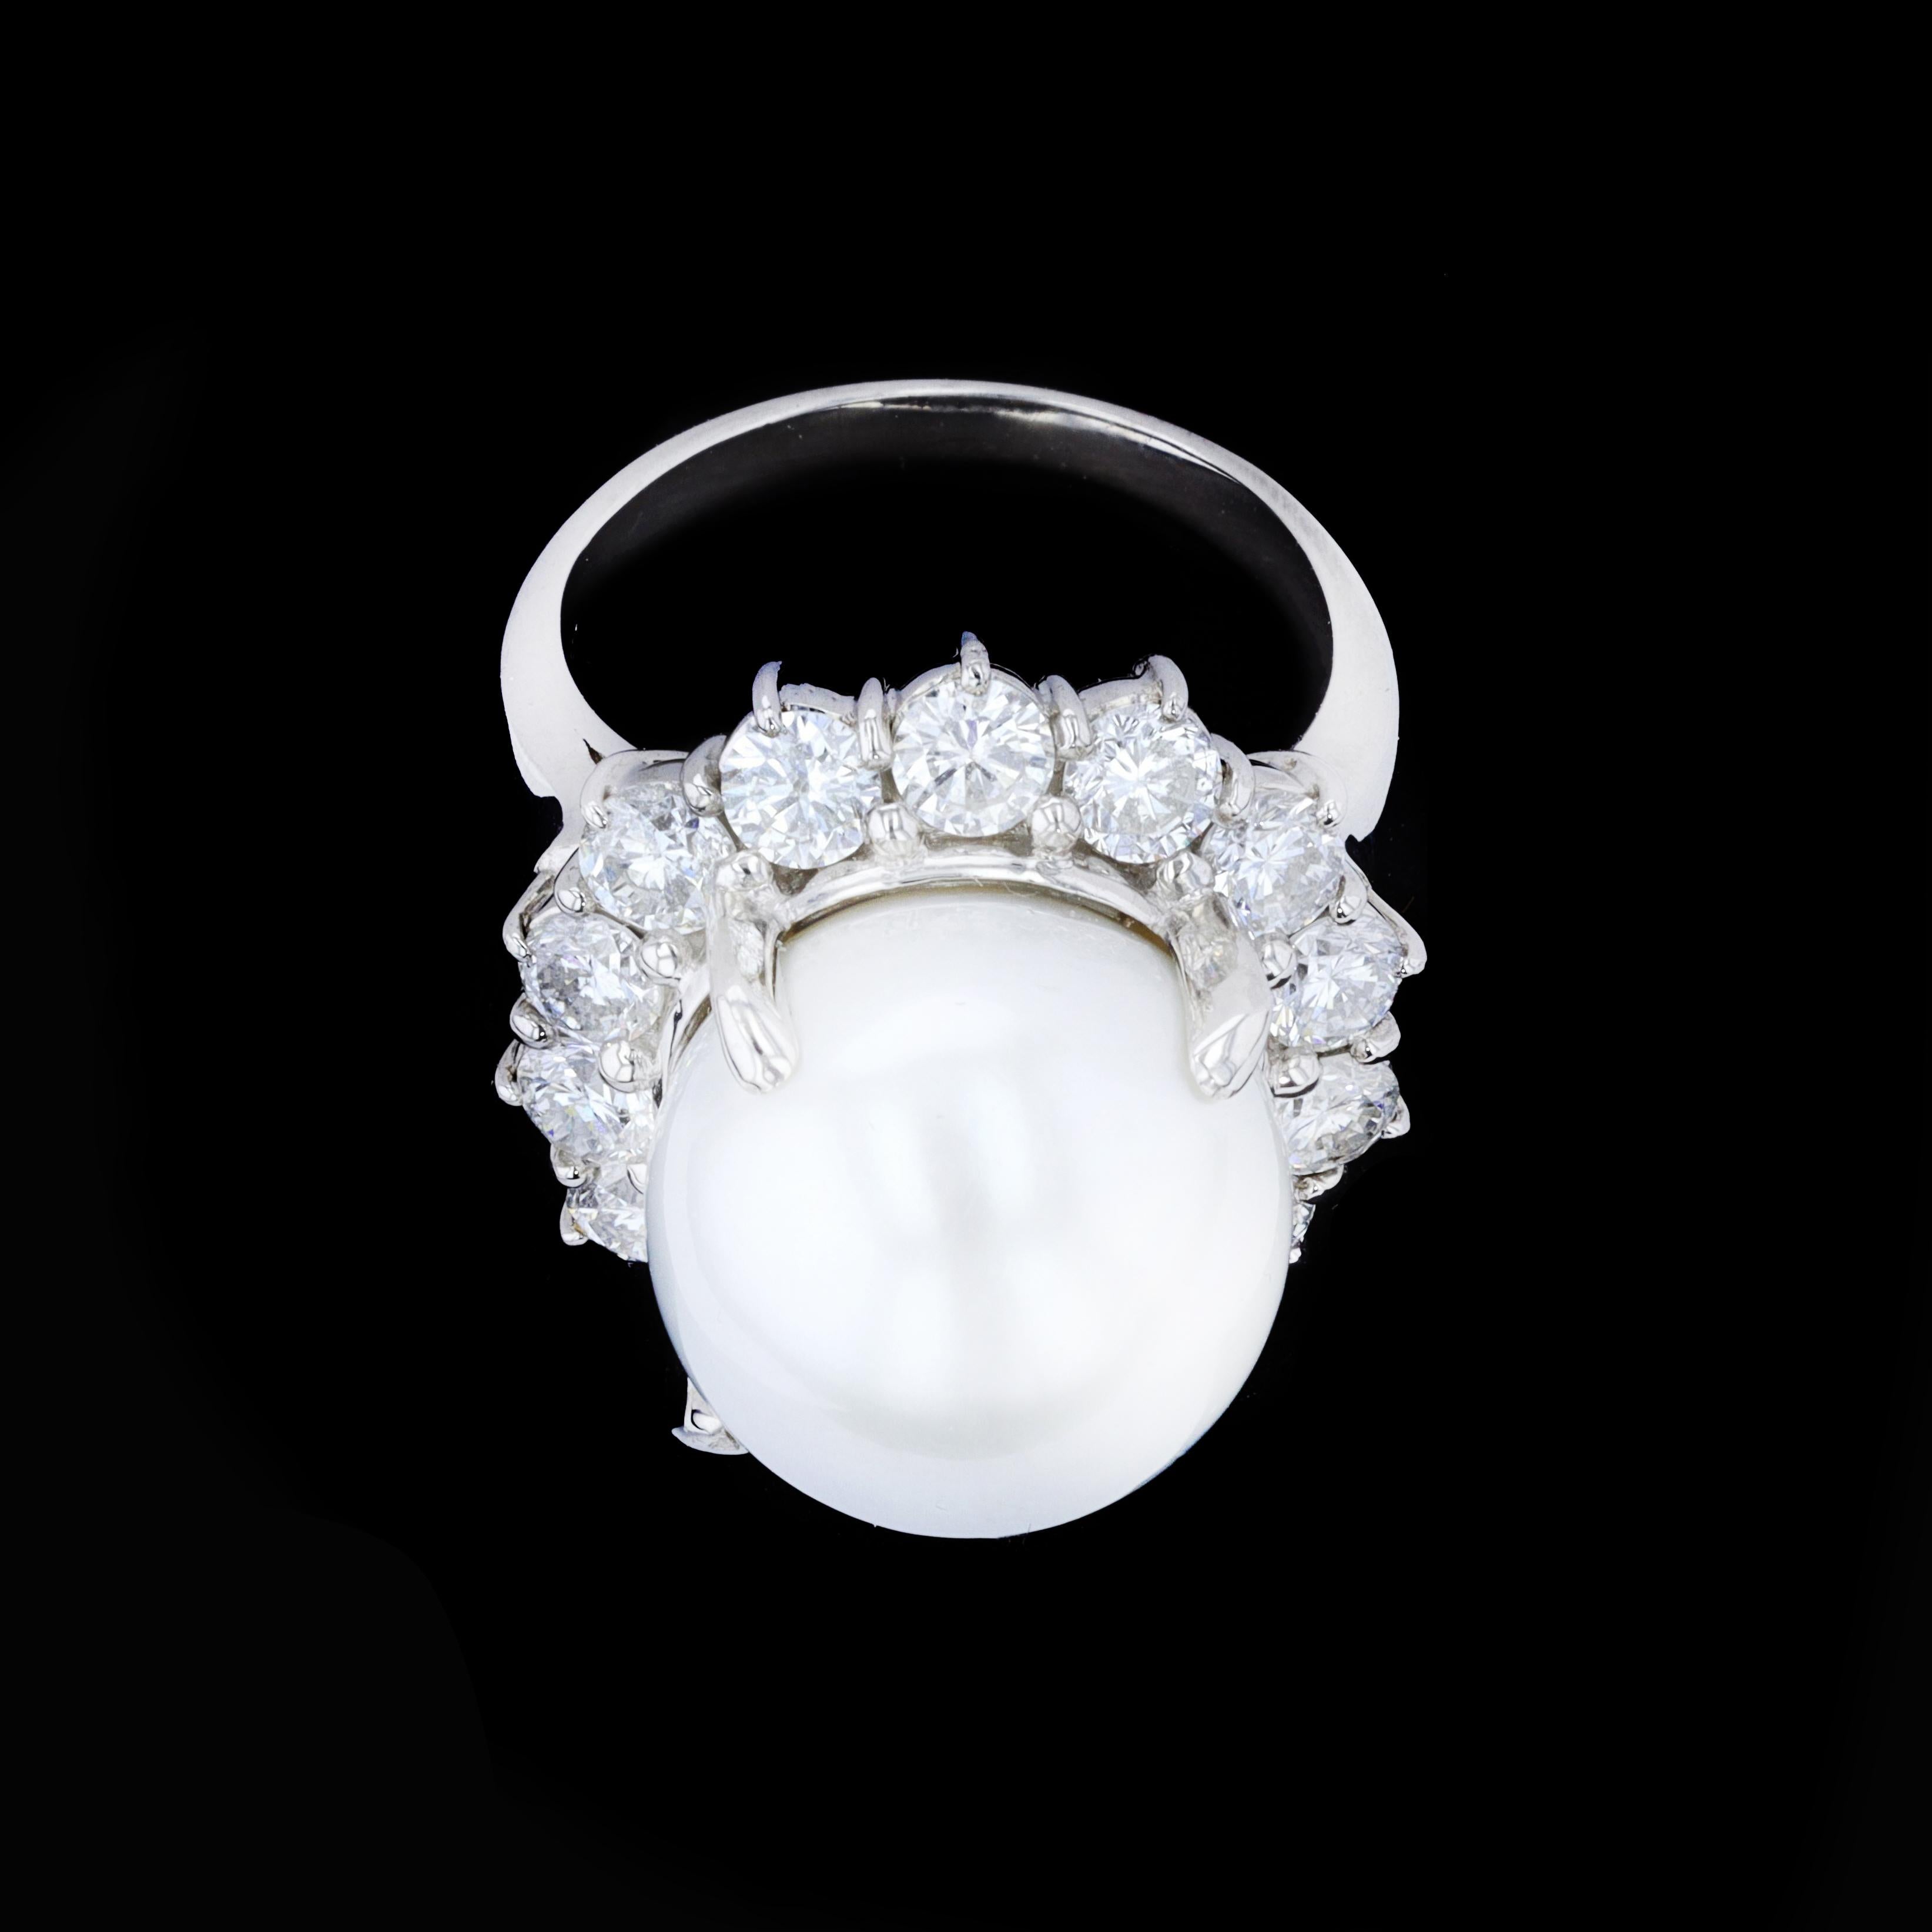 Big and bold, this estate pearl and diamond cocktail ring is both fun and stylish. Center stage is a 14.00 mm round pearl surrounded by 14 round 2.26 twt diamonds. The color of these diamonds is F-G with VS clarity. The top of the ring measures 20mm